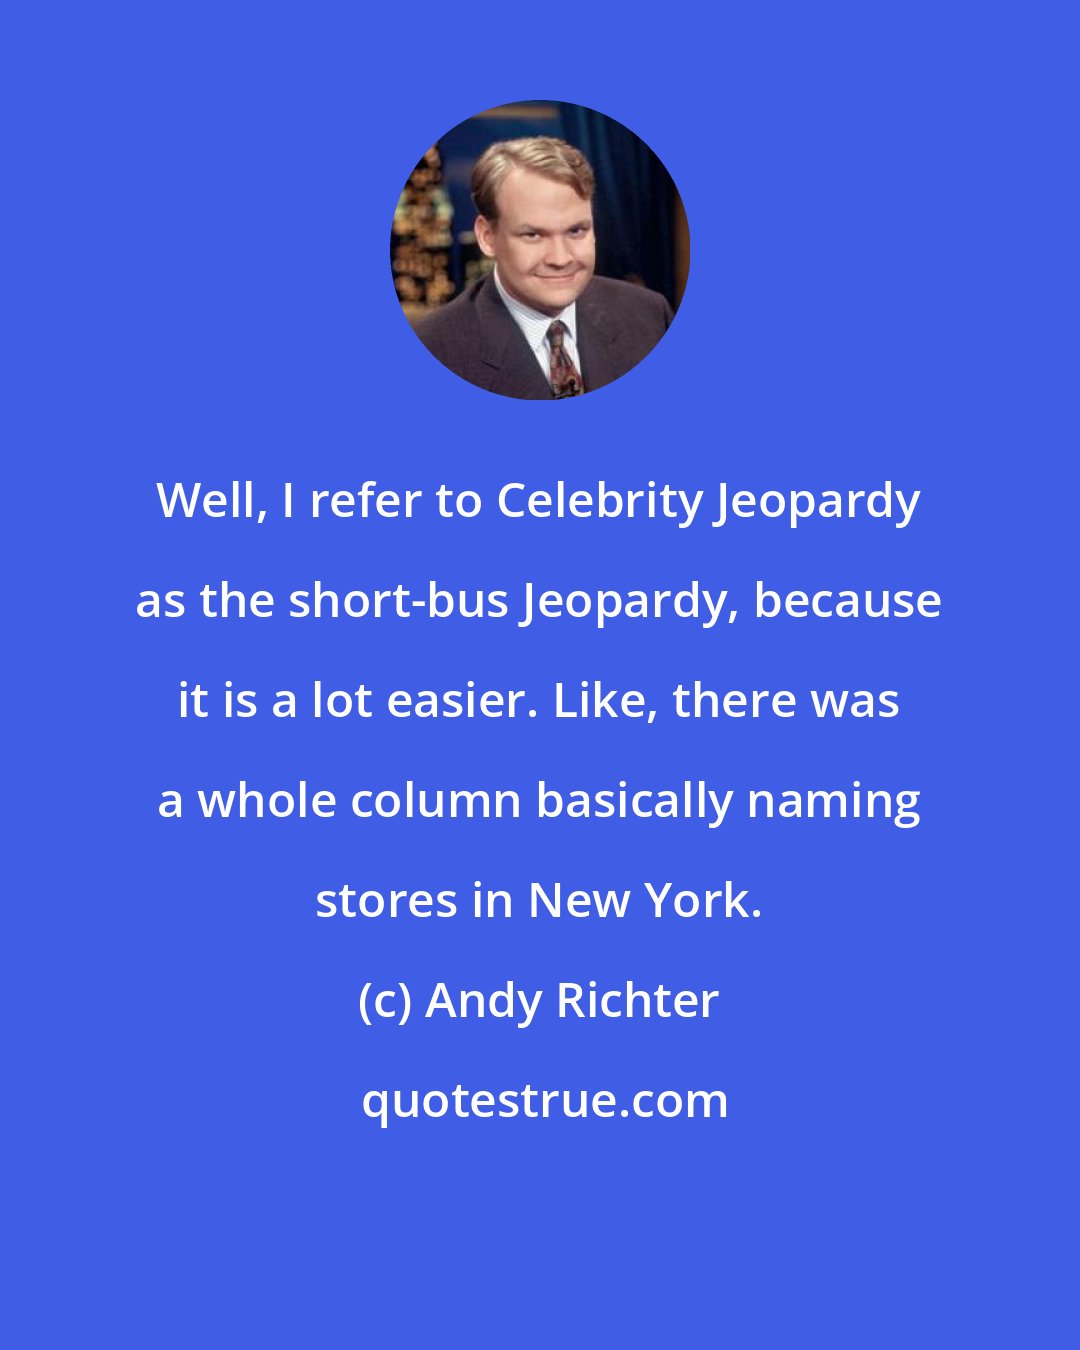 Andy Richter: Well, I refer to Celebrity Jeopardy as the short-bus Jeopardy, because it is a lot easier. Like, there was a whole column basically naming stores in New York.